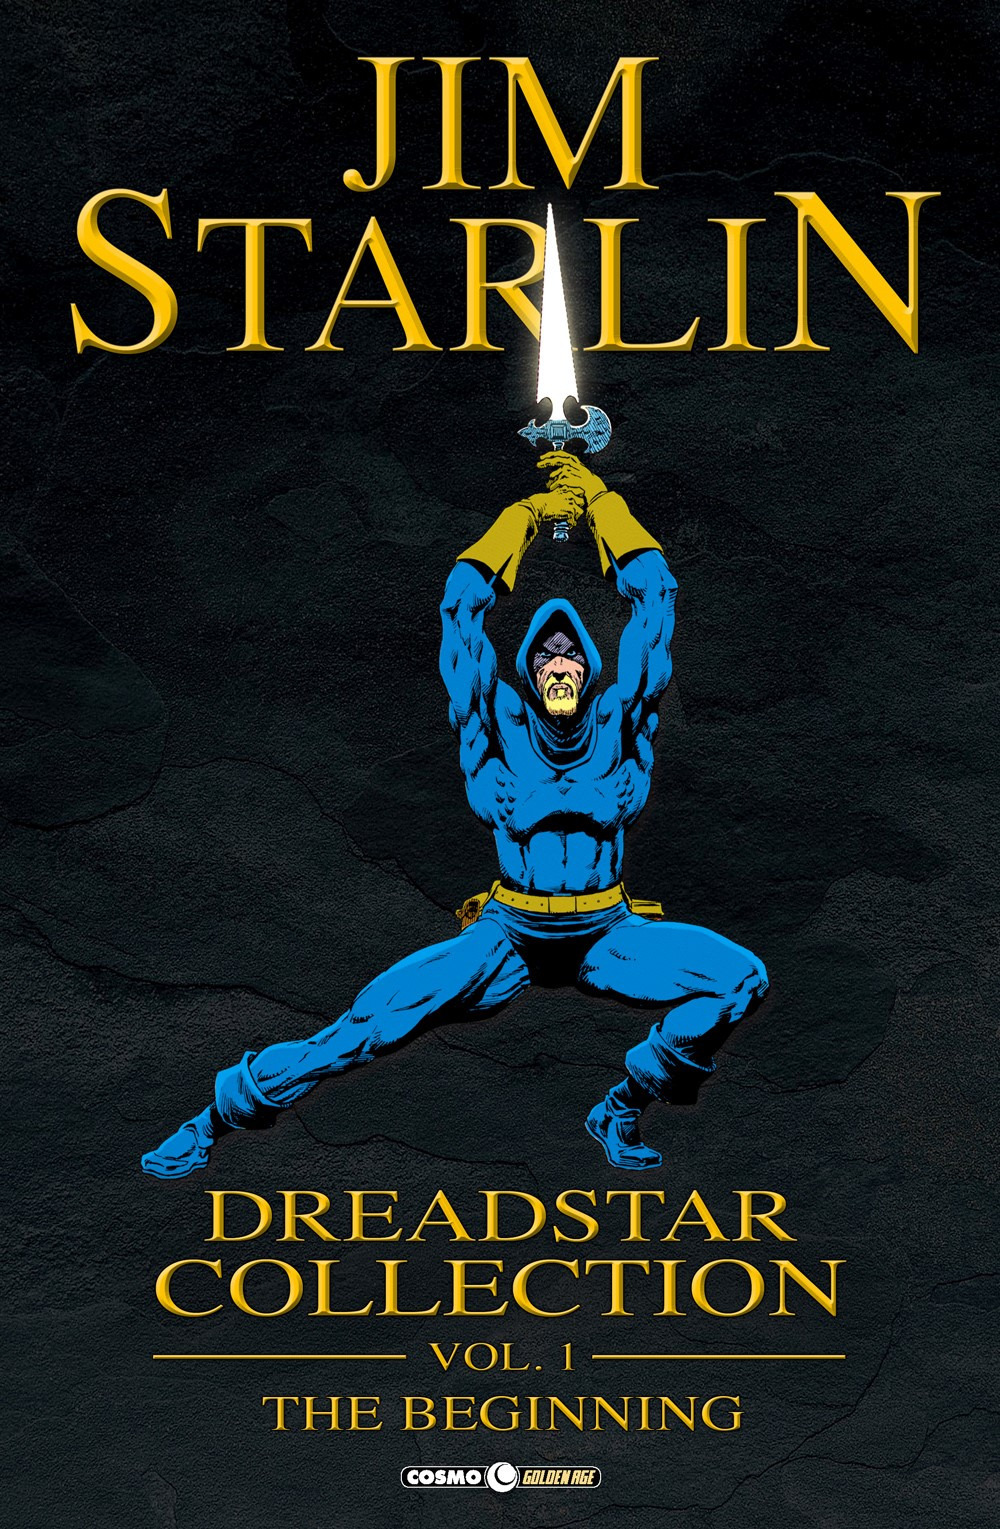 Dreadstar collection. Vol. 1: The beginning